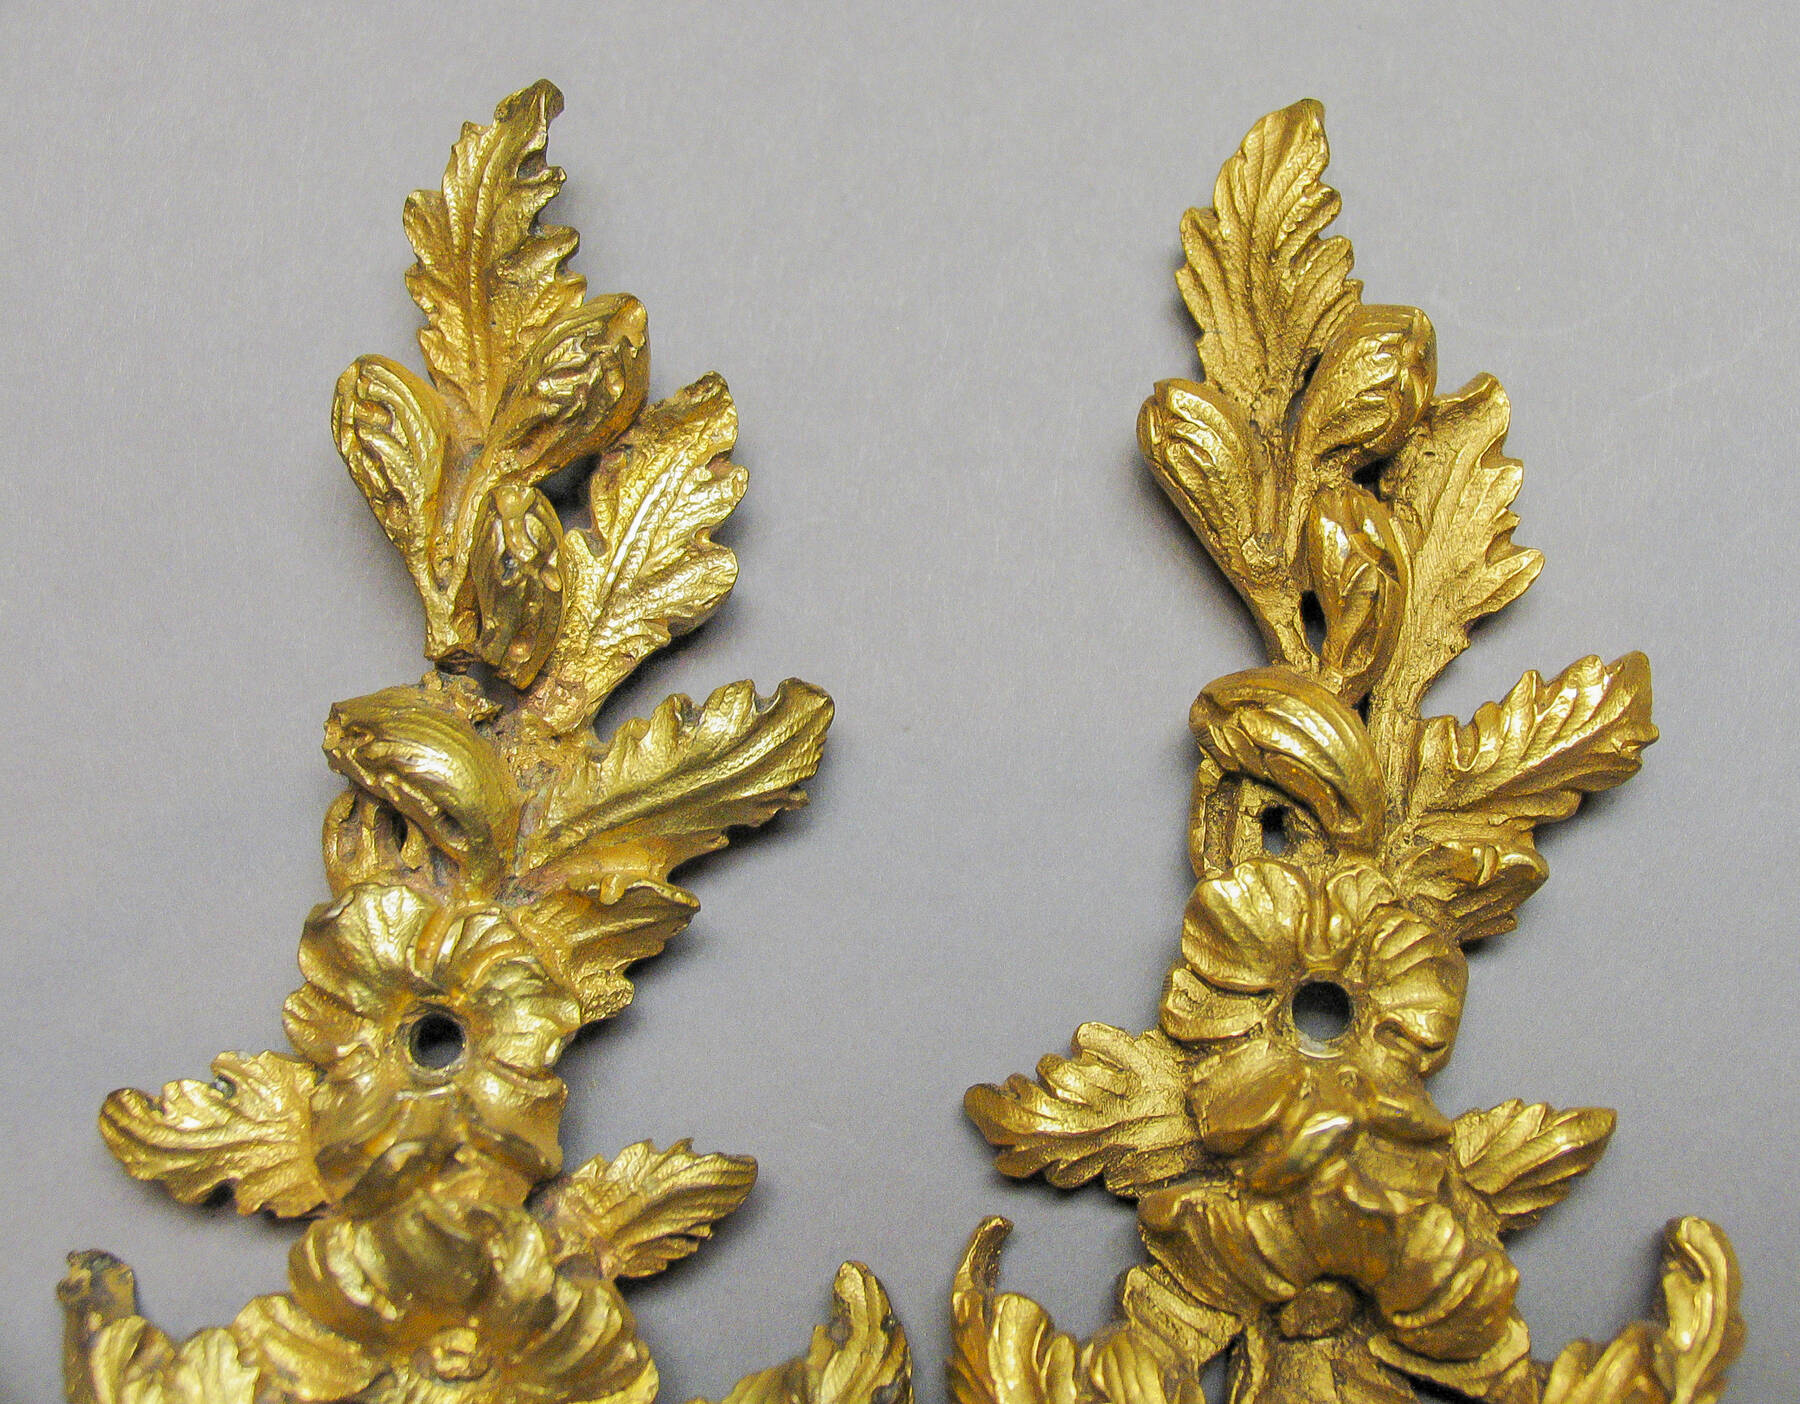 detail of two gilt bronze floral mounts, a reproduction on the left and an original on the right